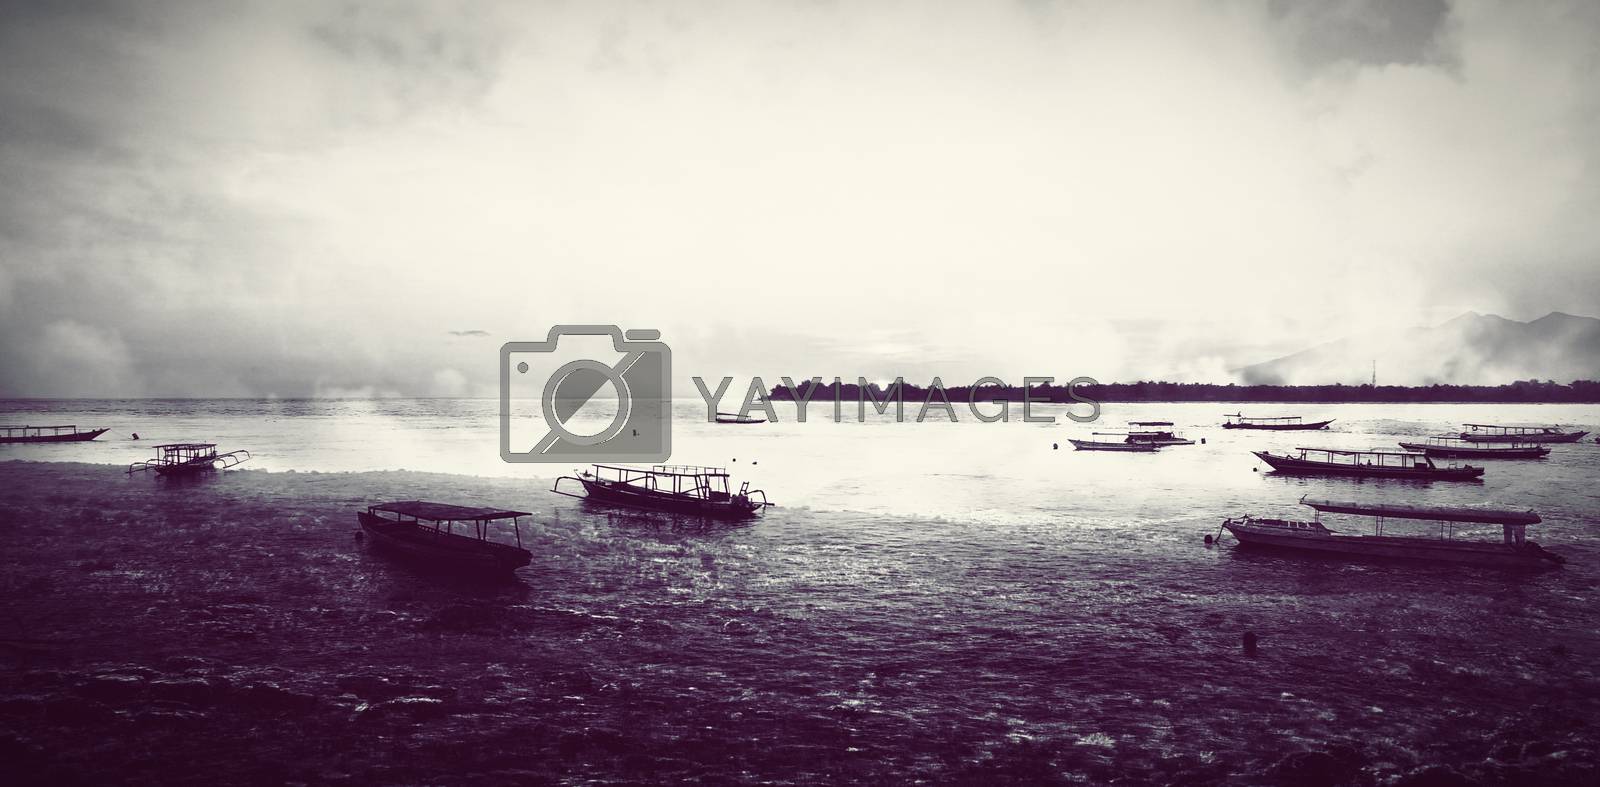 Royalty free image of View of passengers craft by Wavebreakmedia